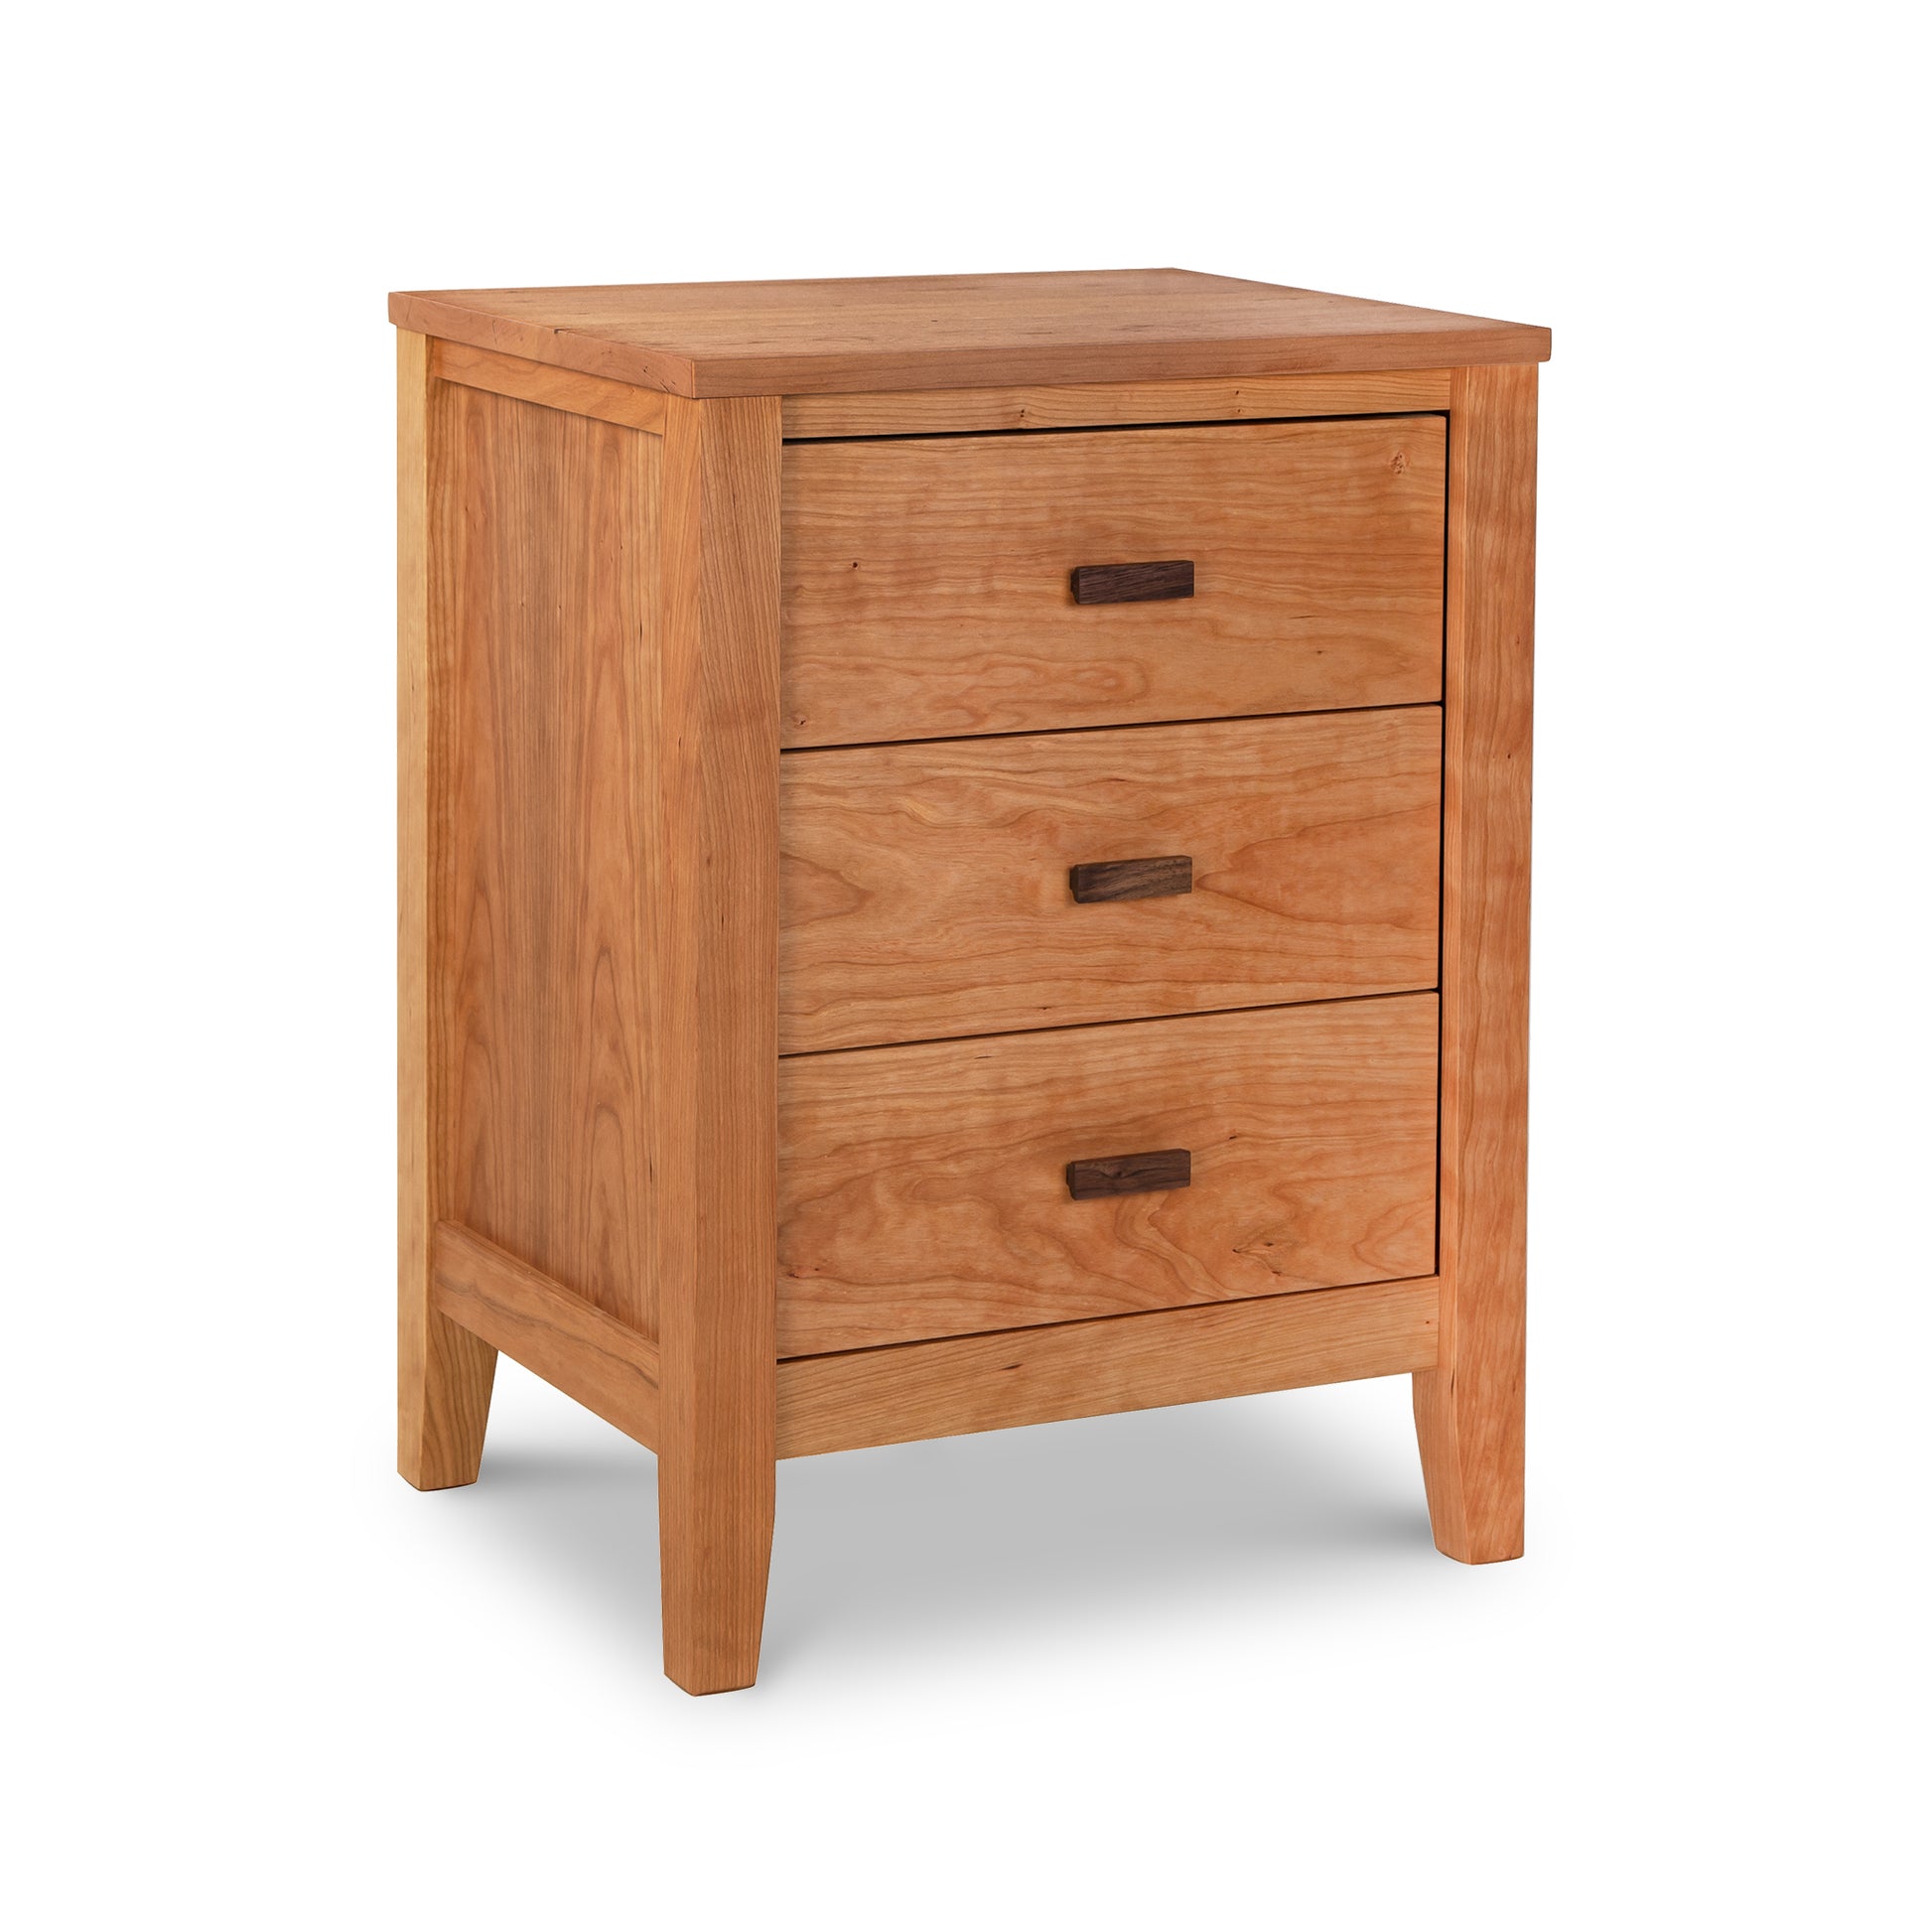 An Andover Modern 3-Drawer Nightstand, showcasing Maple Corner Woodworks craftsmanship, with three drawers.